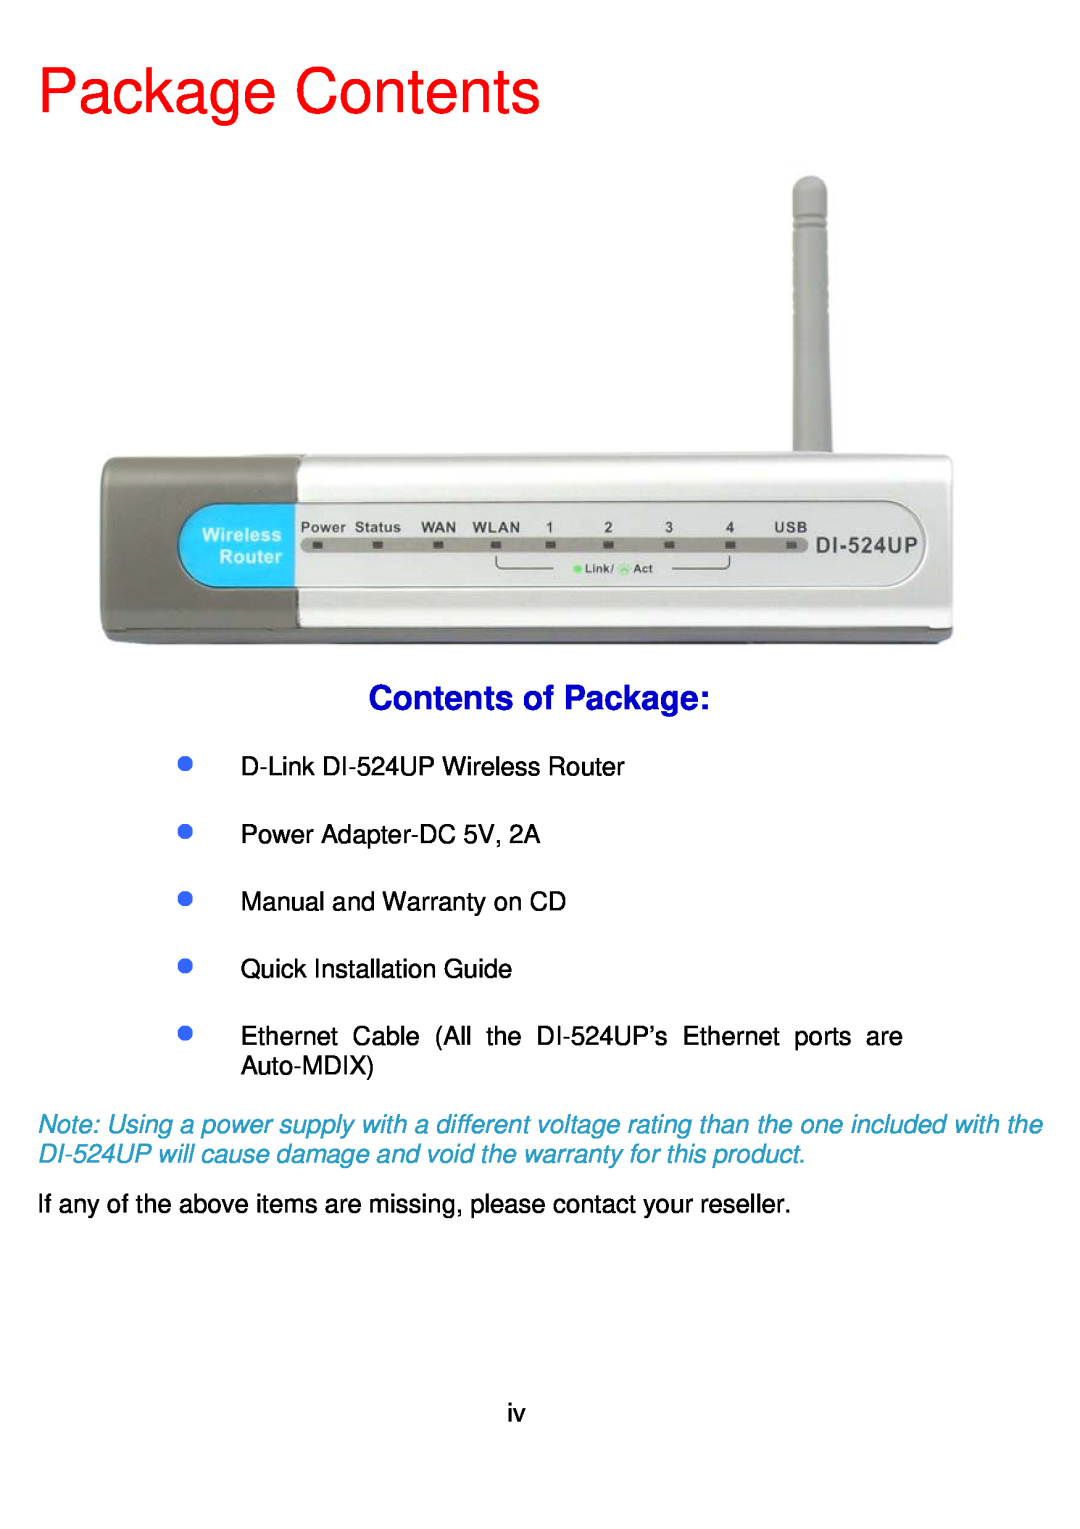 D-Link DI-524UP manual Package Contents, Contents of Package 